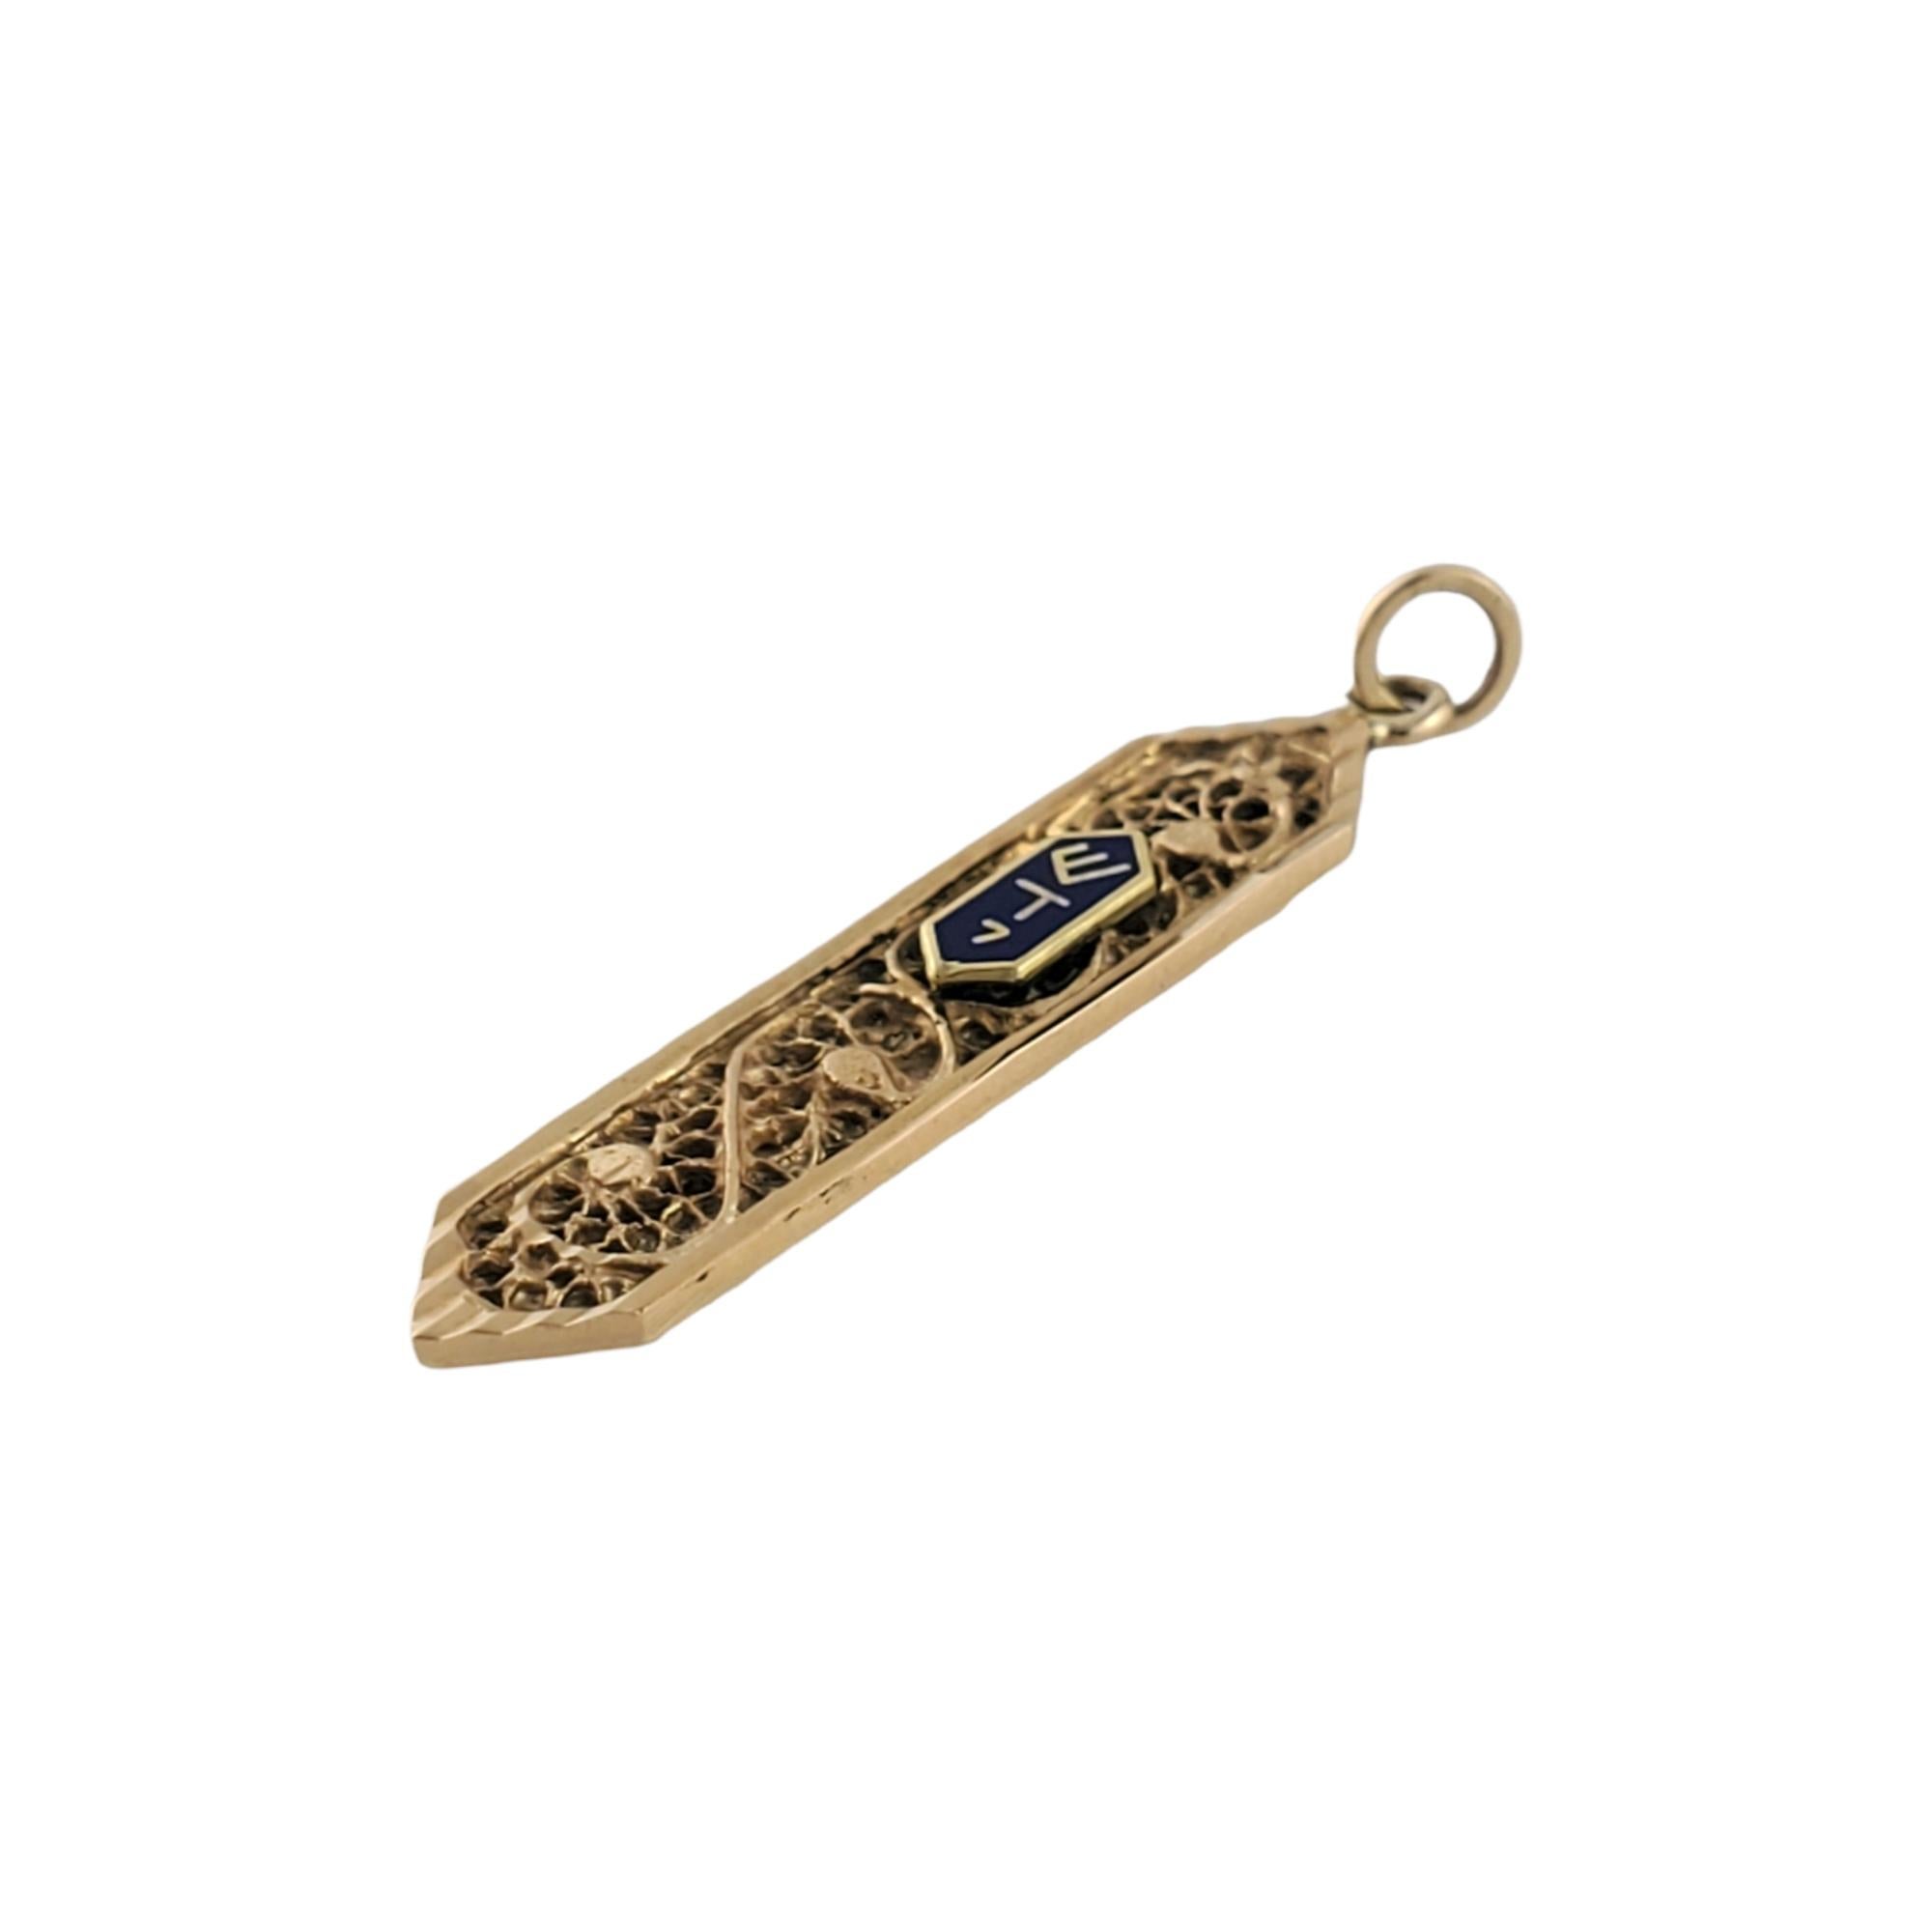 14K Yellow Gold Flat Mezuzah Pendant

This  14K yellow gold mezuzah pendant has the perfect detailing and features a beautiful blue enamel!

Size: 6mm X 34mm

Weight: 2.5 gr/ 1.6 dwt

Hallmark: 14K 11BAL

Very good condition, professionally